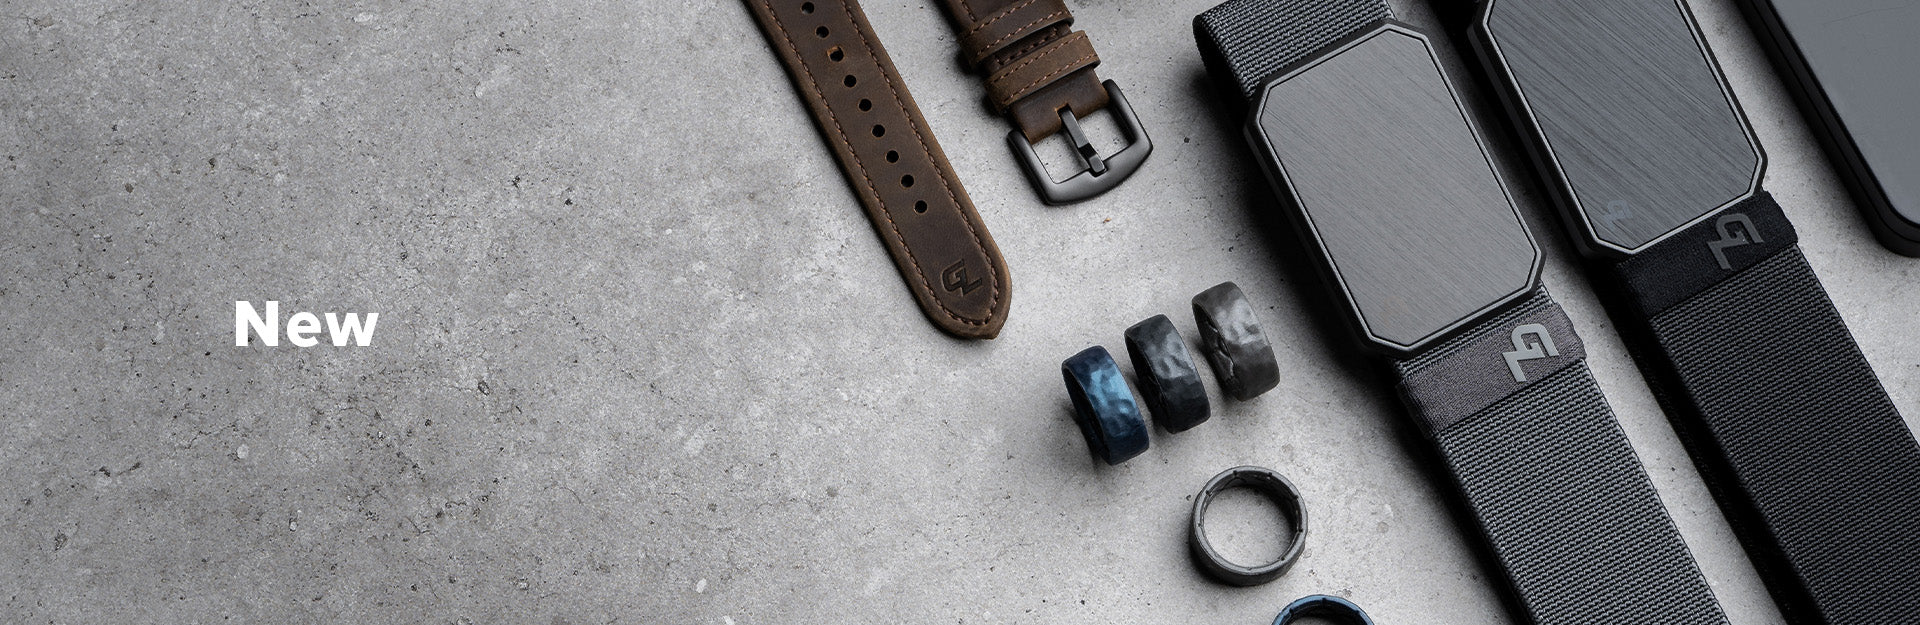 Fall Into Savings | $25 Rings | $39 Zeus & Watch Bands | $49 Belts | $75 Wallets + Money Clip | $95 Wallet + Leather Go | $30 Leather Go